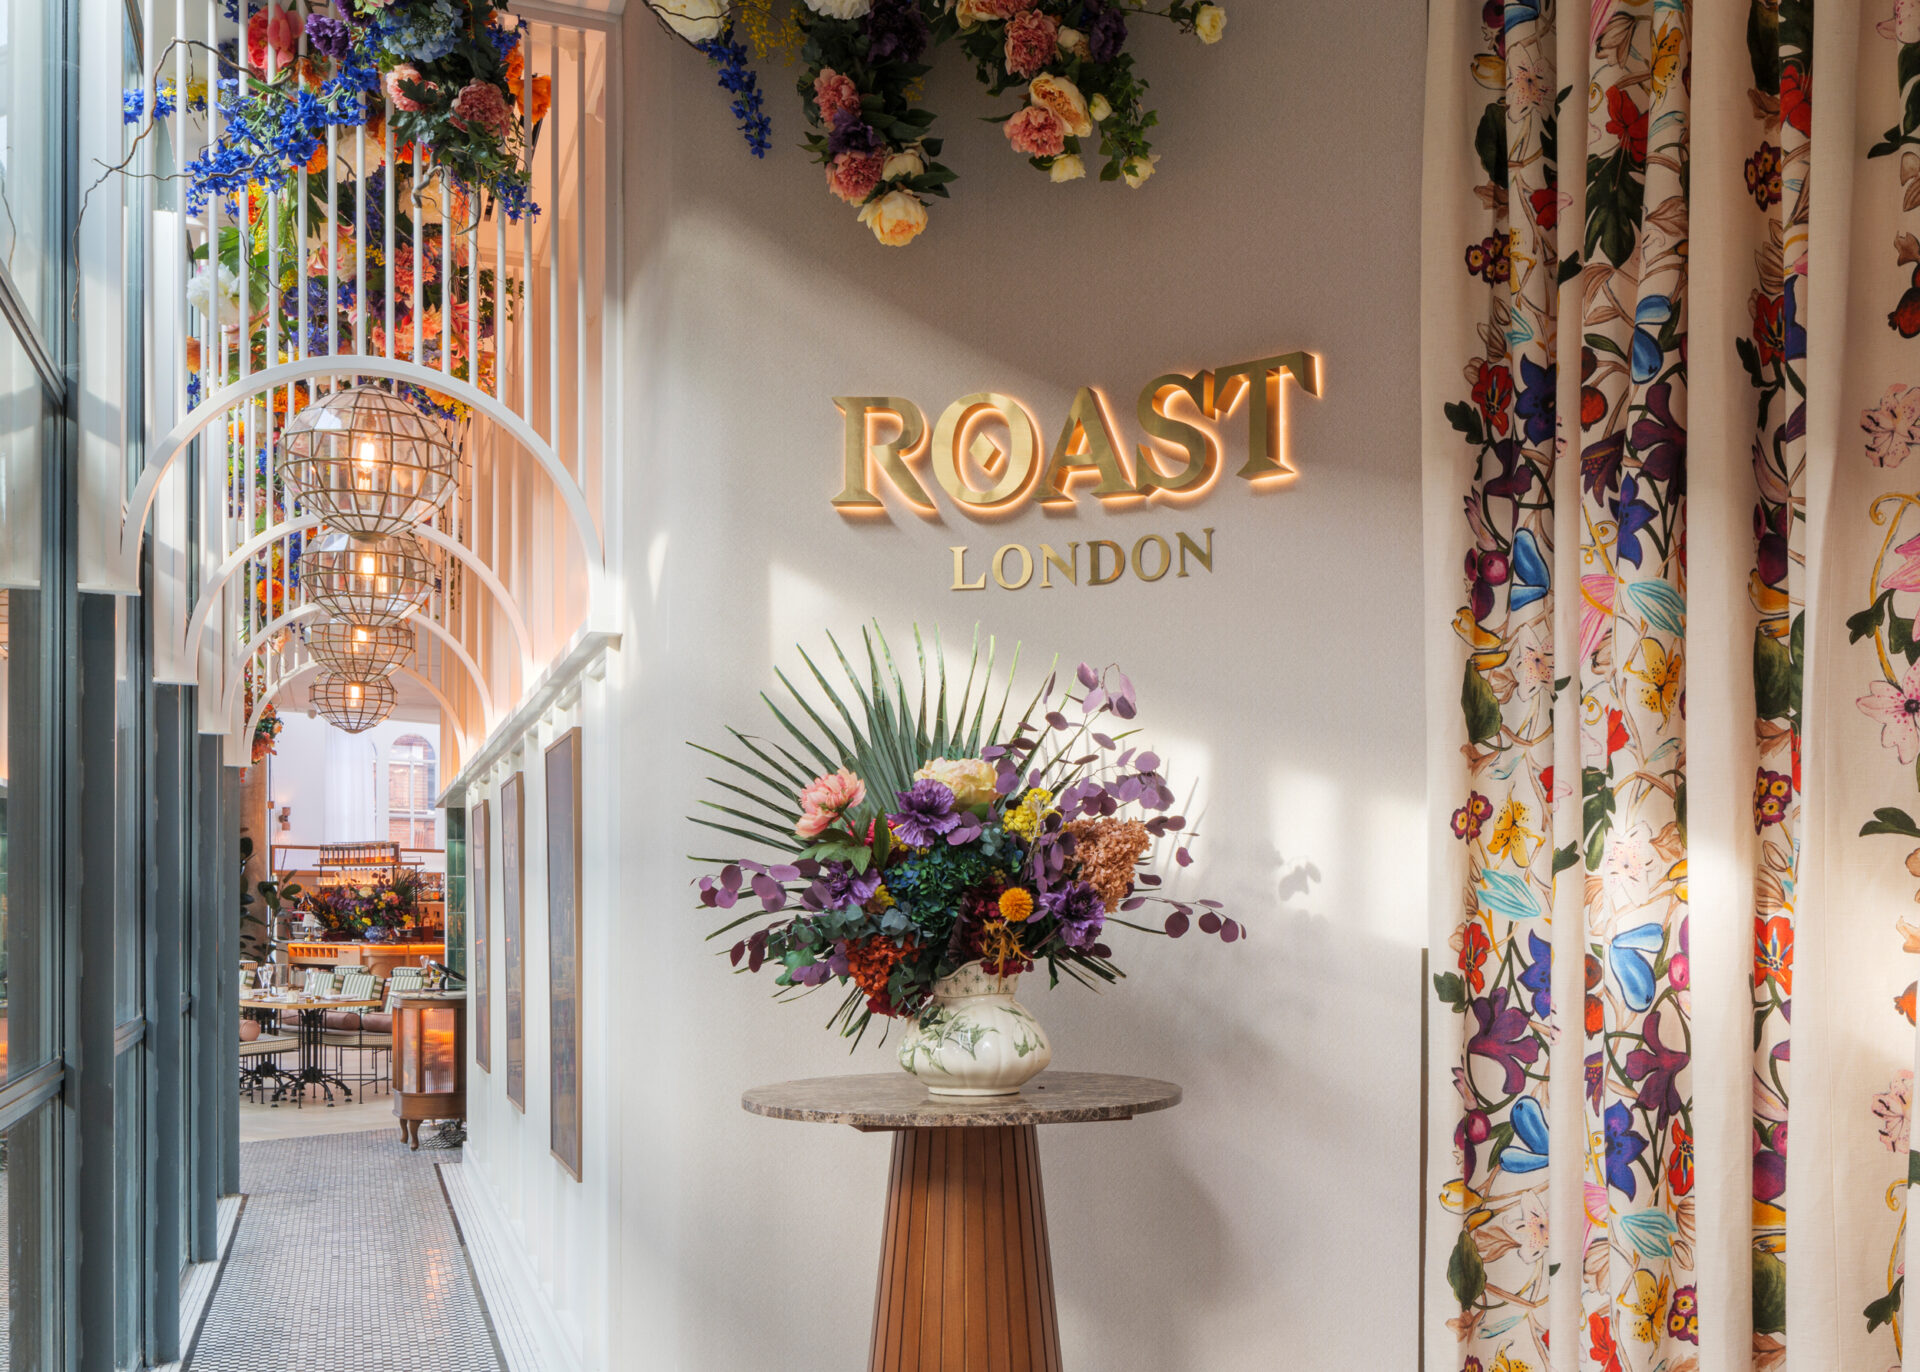 Flower arrangement and logo feature at the entrance of Roast Restaurant London, designed by 3Stories brand and interior agency